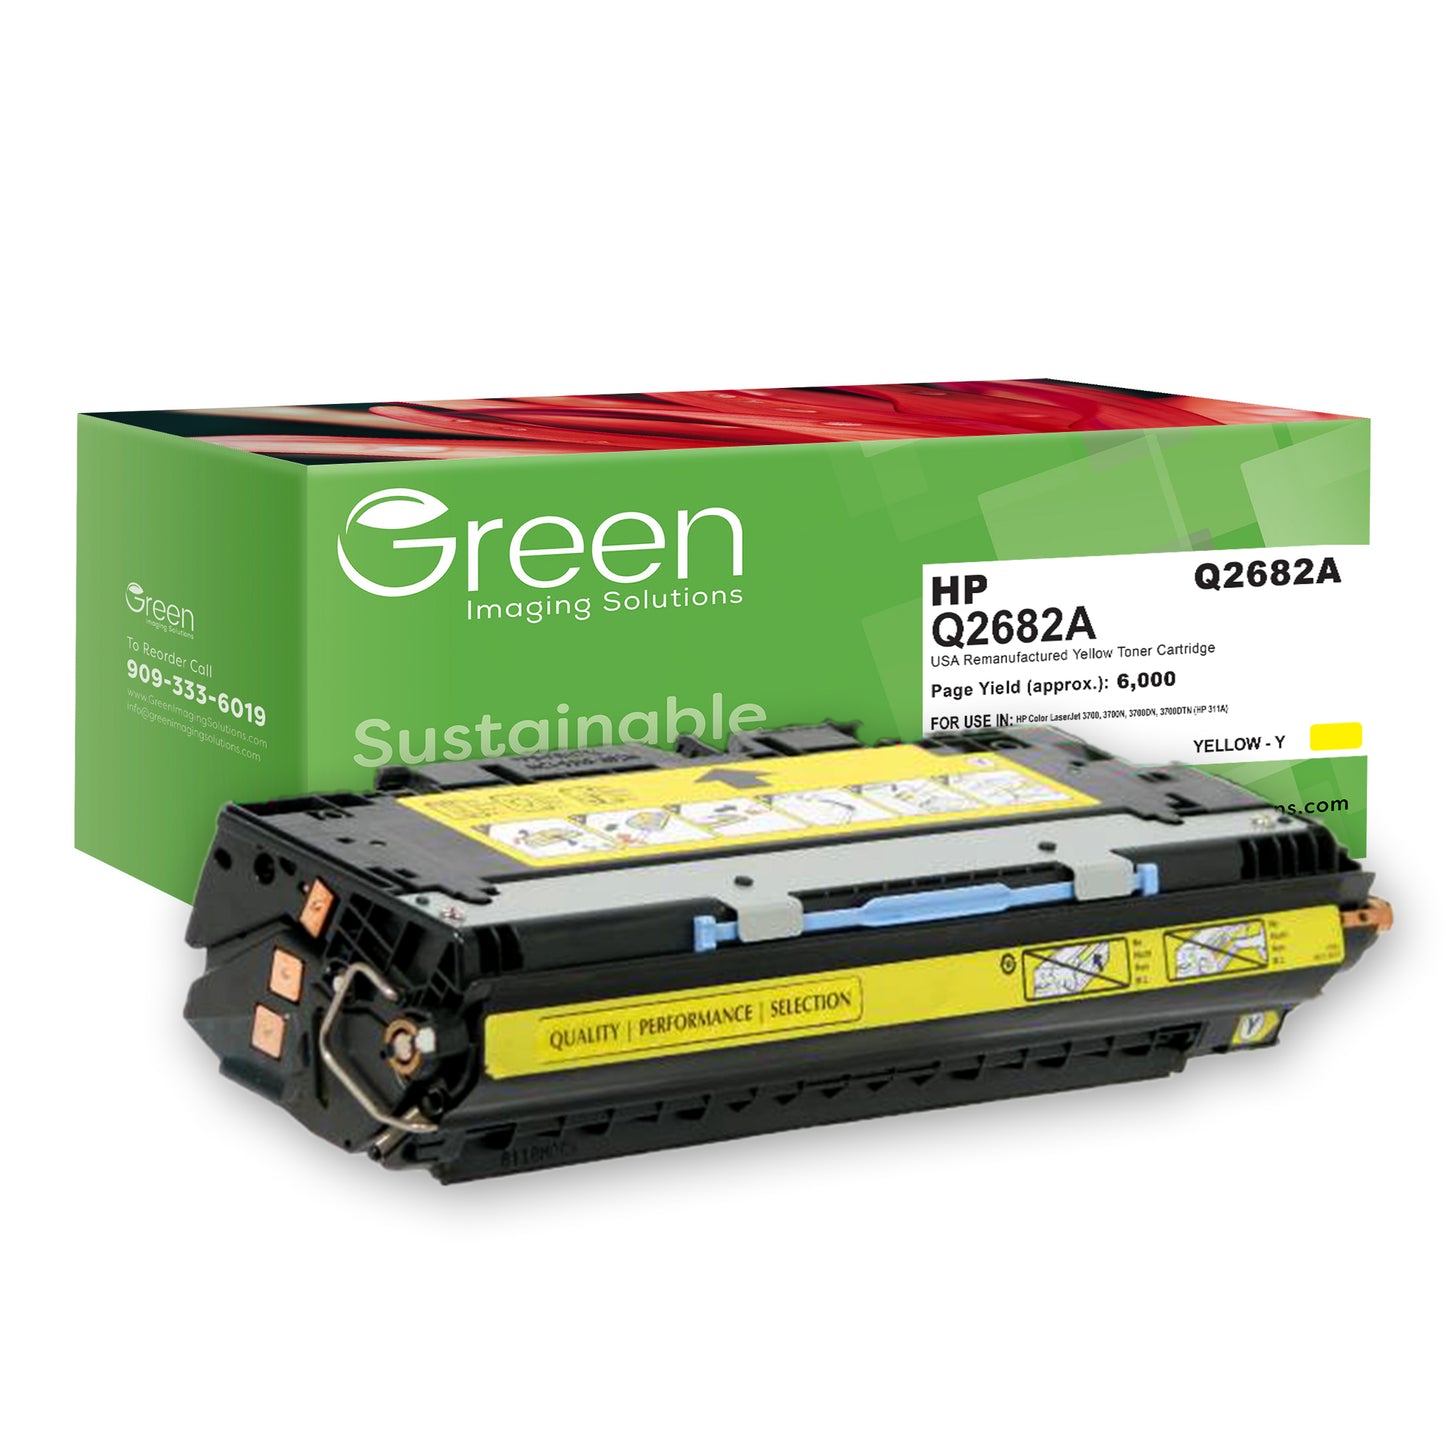 GIS USA Remanufactured Yellow Toner Cartridge for HP Q2682A (HP 311A)